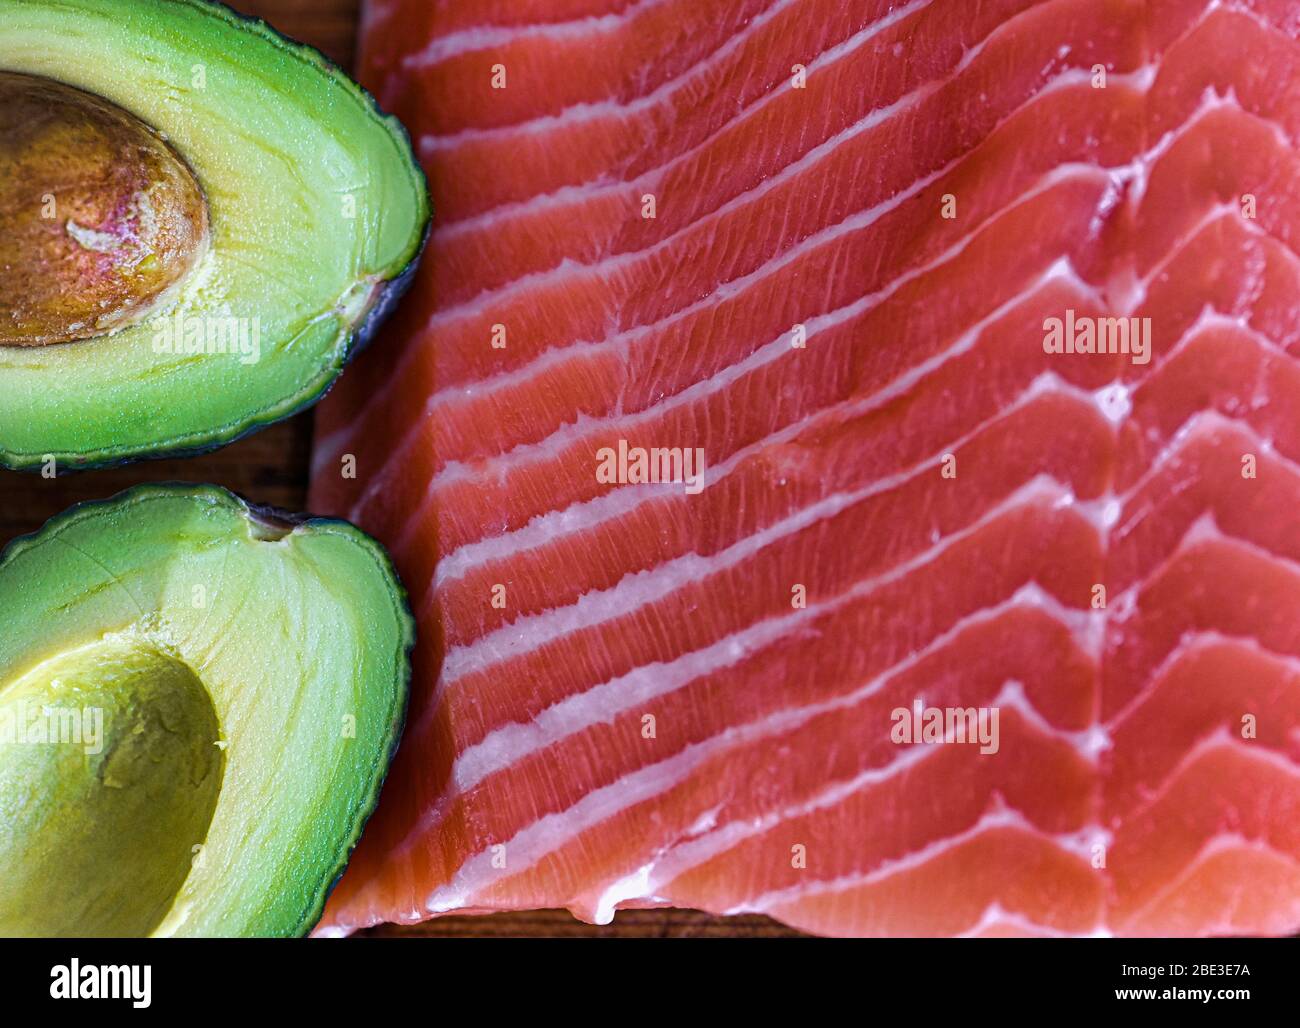 Close-up of raw salmon fillet and avocado cut in half Stock Photo